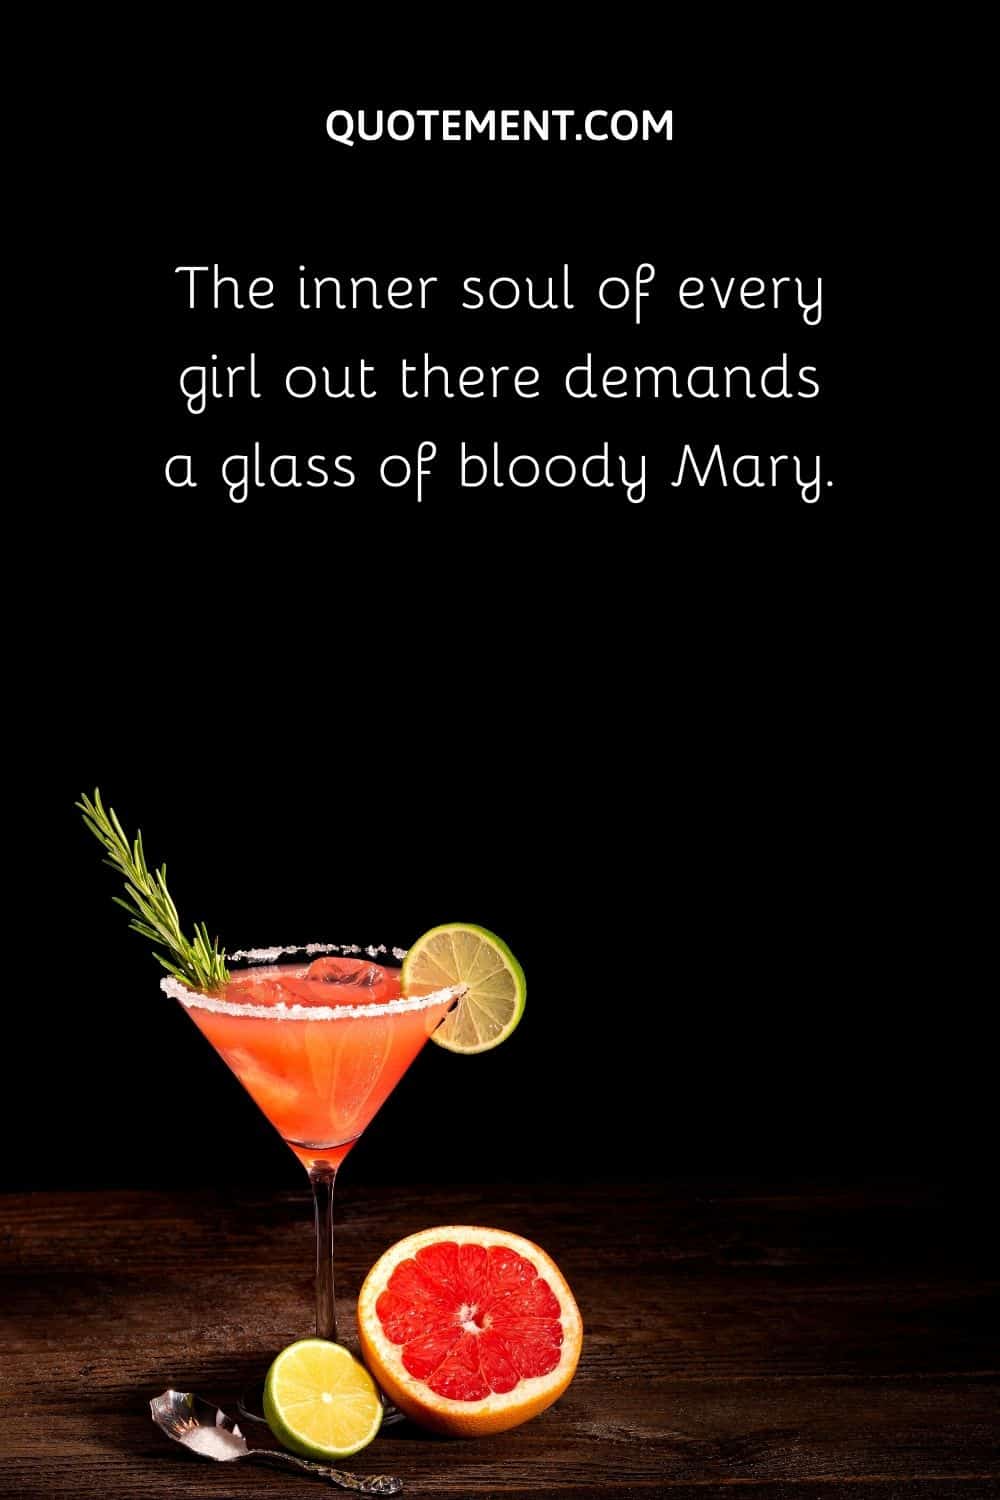 The inner soul of every girl out there demands a glass of bloody Mary.